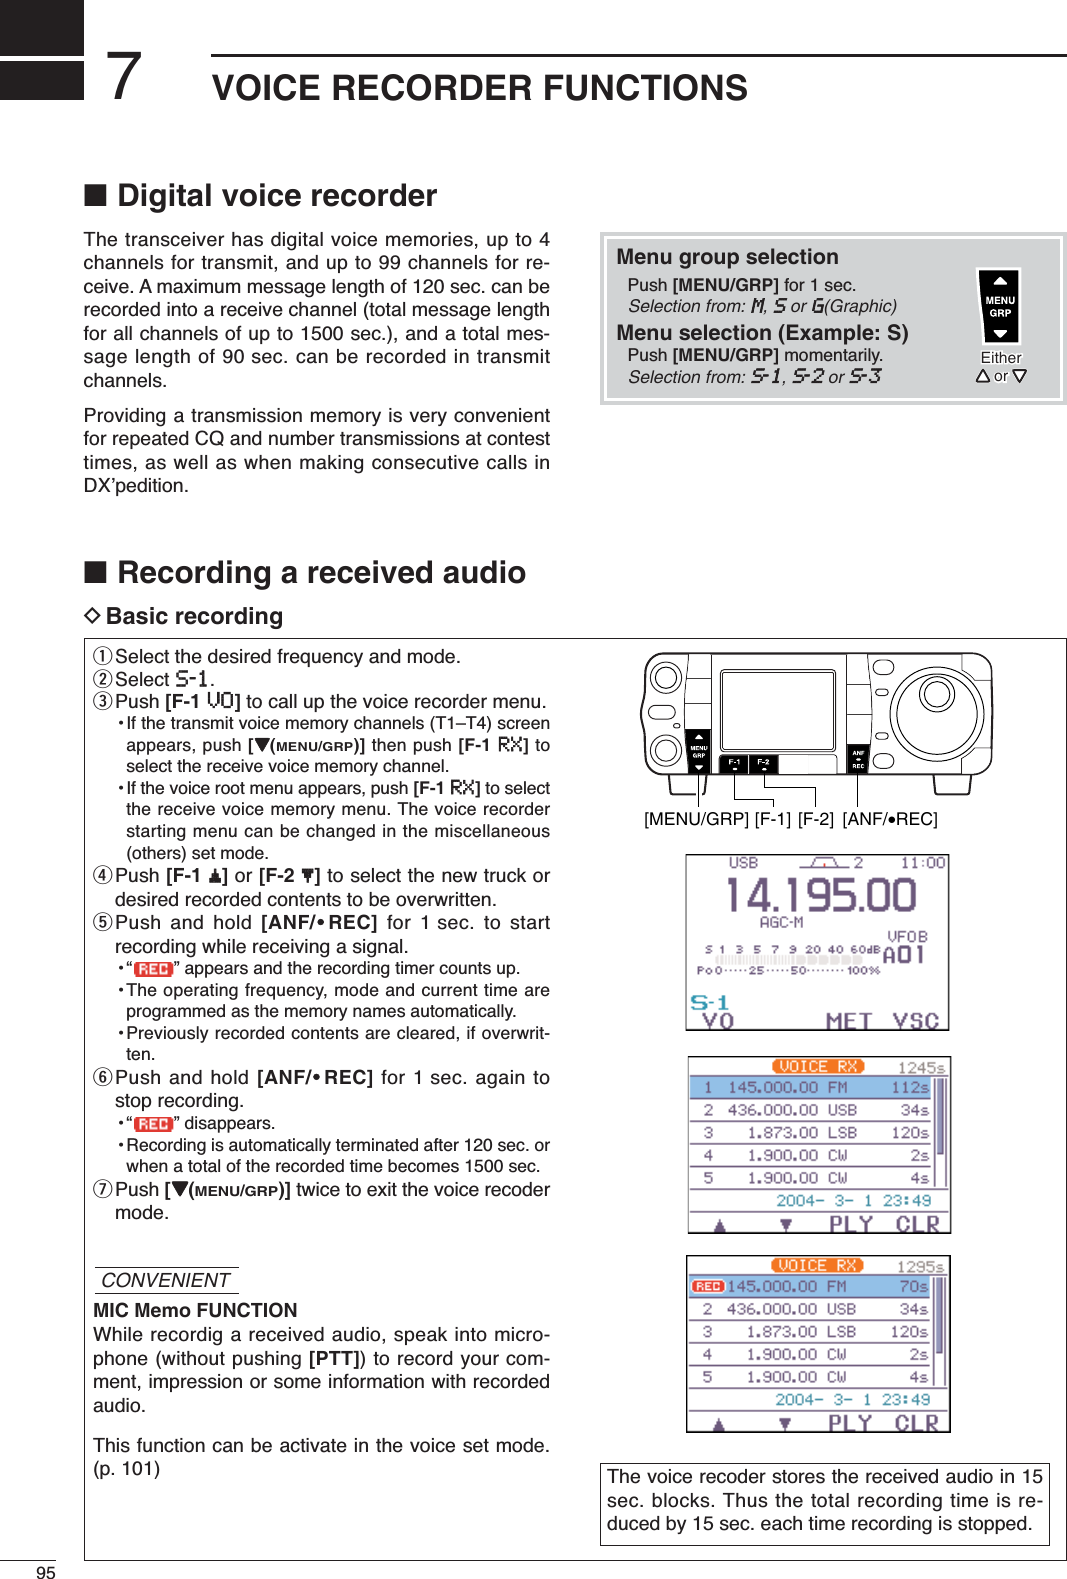 795VOICE RECORDER FUNCTIONS■Digital voice recorderThe transceiver has digital voice memories, up to 4channels for transmit, and up to 99 channels for re-ceive. A maximum message length of 120 sec. can berecorded into a receive channel (total message lengthfor all channels of up to 1500 sec.), and a total mes-sage length of 90 sec. can be recorded in transmitchannels.Providing a transmission memory is very convenientfor repeated CQ and number transmissions at contesttimes, as well as when making consecutive calls inDX’pedition.■Recording a received audioDBasic recordingqSelect the desired frequency and mode.wSelect S-1.ePush [F-1 VO]to call up the voice recorder menu.•If the transmit voice memory channels (T1–T4) screenappears, push [Z(MENU/GRP)] then push [F-1 RX]toselect the receive voice memory channel.• If the voice root menu appears, push [F-1 RX]to selectthe receive voice memory menu. The voice recorderstarting menu can be changed in the miscellaneous(others) set mode.rPush [F-1 ≤]or [F-2 ≥]to select the new truck ordesired recorded contents to be overwritten.tPush and hold [ANF/•REC] for 1 sec. to startrecording while receiving a signal.• “ ” appears and the recording timer counts up.•The operating frequency, mode and current time areprogrammed as the memory names automatically.•Previously recorded contents are cleared, if overwrit-ten.yPush and hold [ANF/•REC] for 1 sec. again tostop recording.• “ ” disappears.•Recording is automatically terminated after 120 sec. orwhen a total of the recorded time becomes 1500 sec.uPush [Z(MENU/GRP)] twice to exit the voice recodermode.MIC Memo FUNCTIONWhile recordig a received audio, speak into micro-phone (without pushing [PTT]) to record your com-ment, impression or some information with recordedaudio.This function can be activate in the voice set mode.(p. 101) The voice recoder stores the received audio in 15sec. blocks. Thus the total recording time is re-duced by 15 sec. each time recording is stopped.[MENU/GRP] [F-1] [F-2] [ANF/•REC]CONVENIENTMenu group selectionPush [MENU/GRP] for 1 sec. Selection from: M,SorG(Graphic)Menu selection (Example: S)Push [MENU/GRP] momentarily. Selection from: S-1,S-2orS-3EitherY or ZEitherY or Z